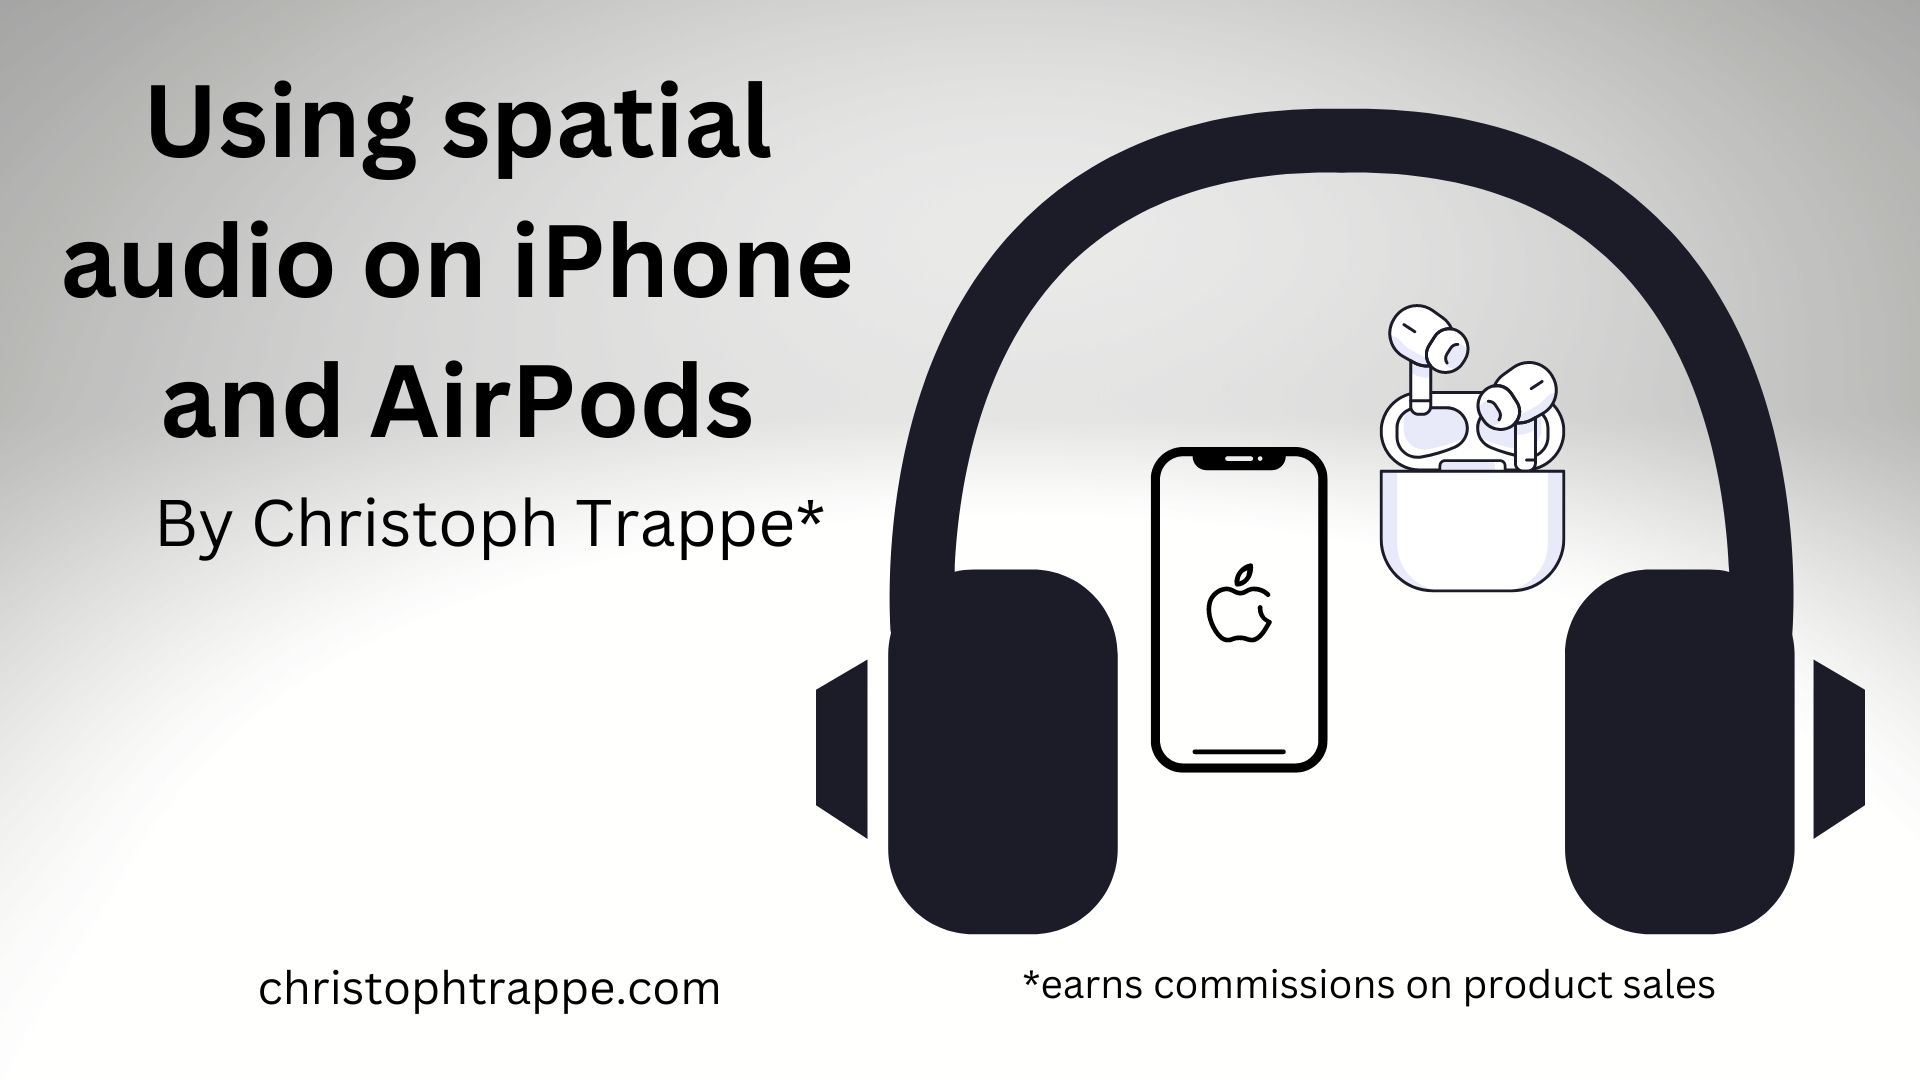 Using spatial audio on iPhone and AirPods